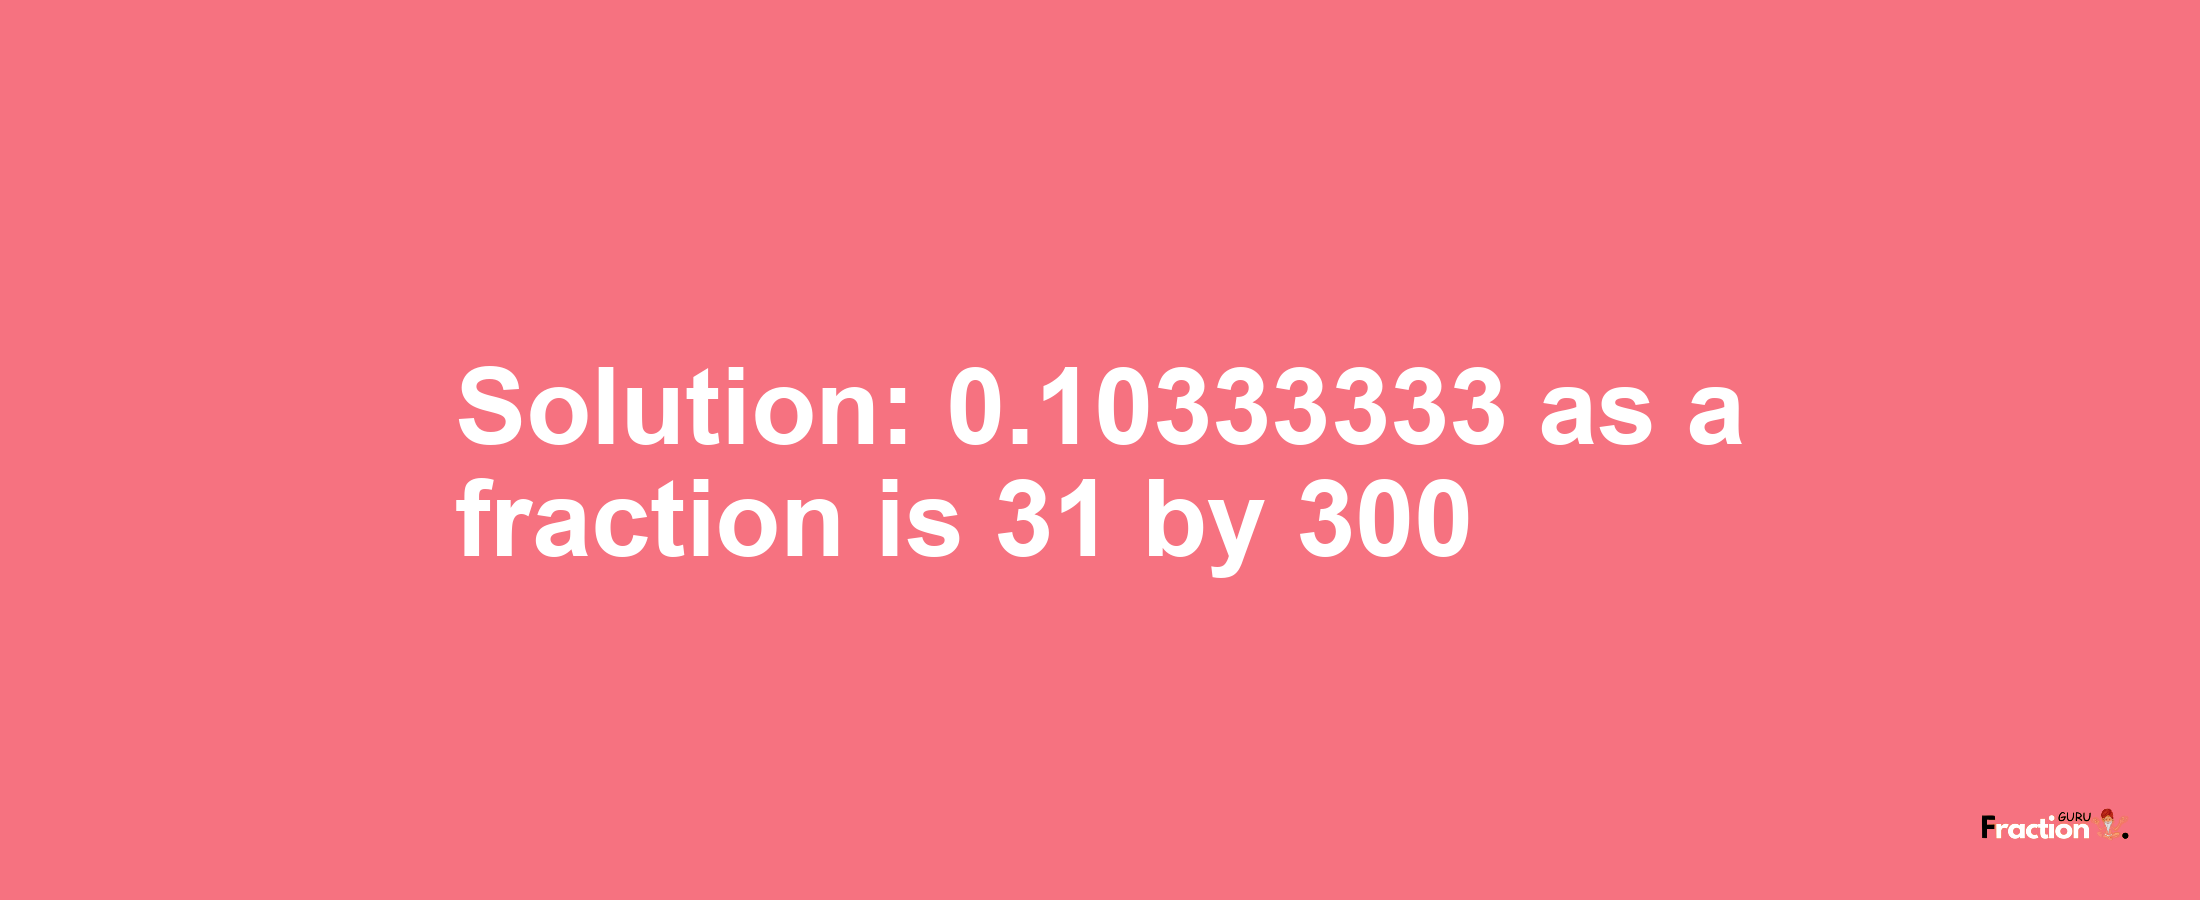 Solution:0.10333333 as a fraction is 31/300